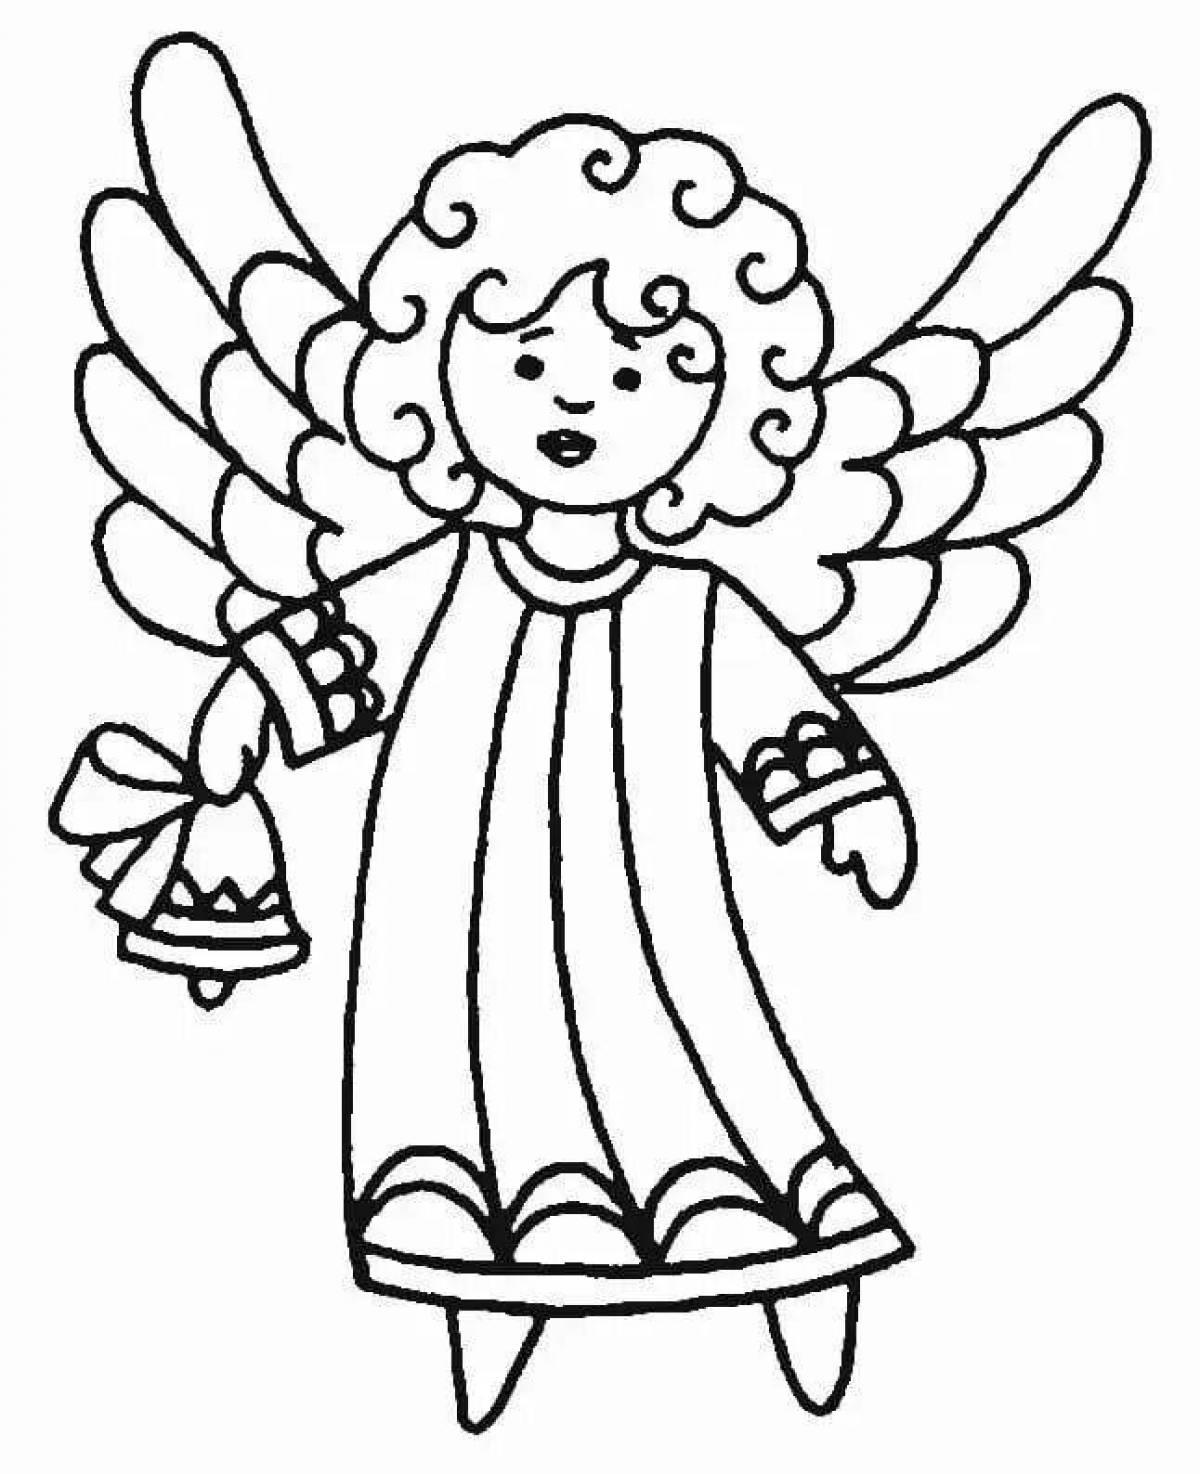 Gorgeous Christmas angel coloring page